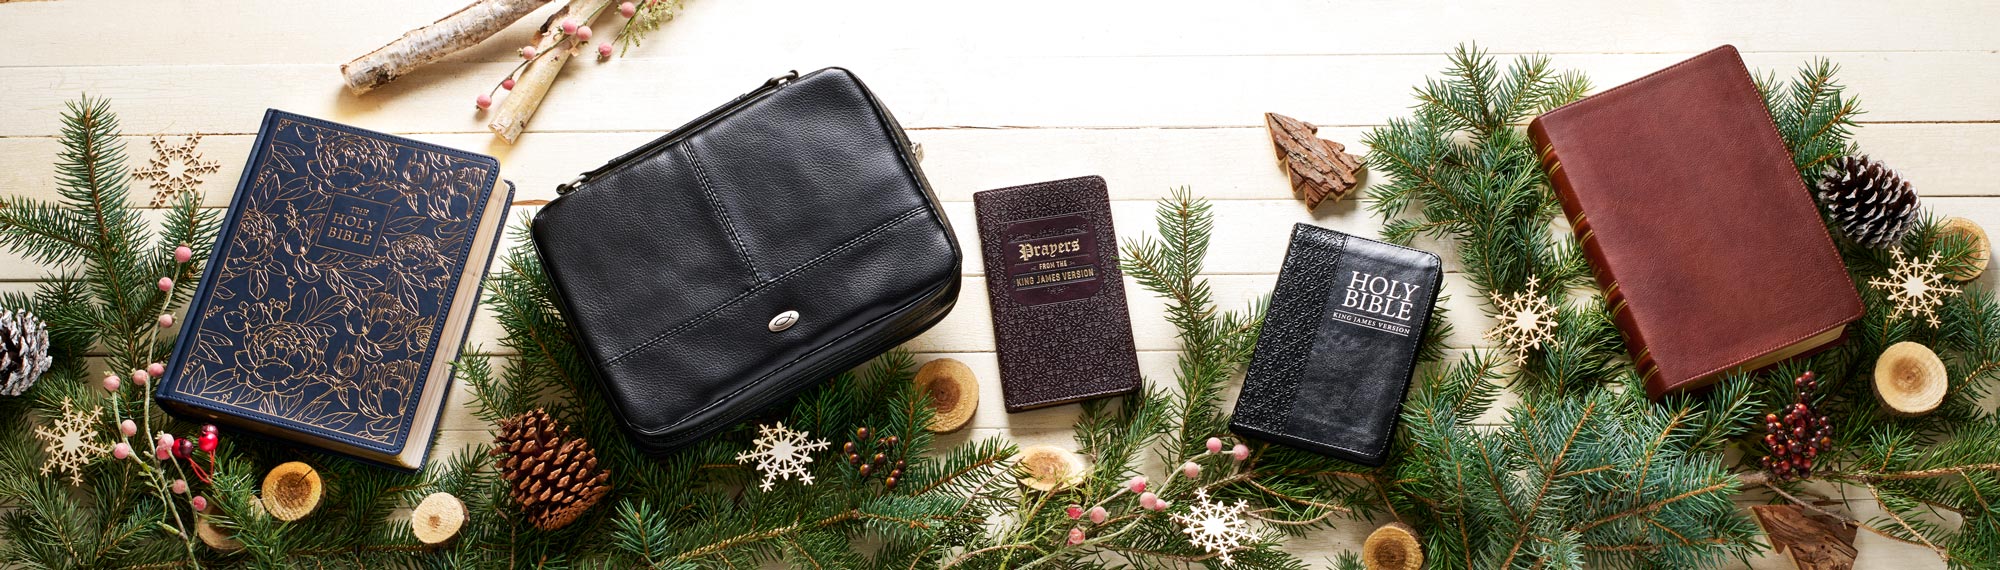 Assortment of Bibles and a Bible cover laying on top of evergreen branches and. Christmas props